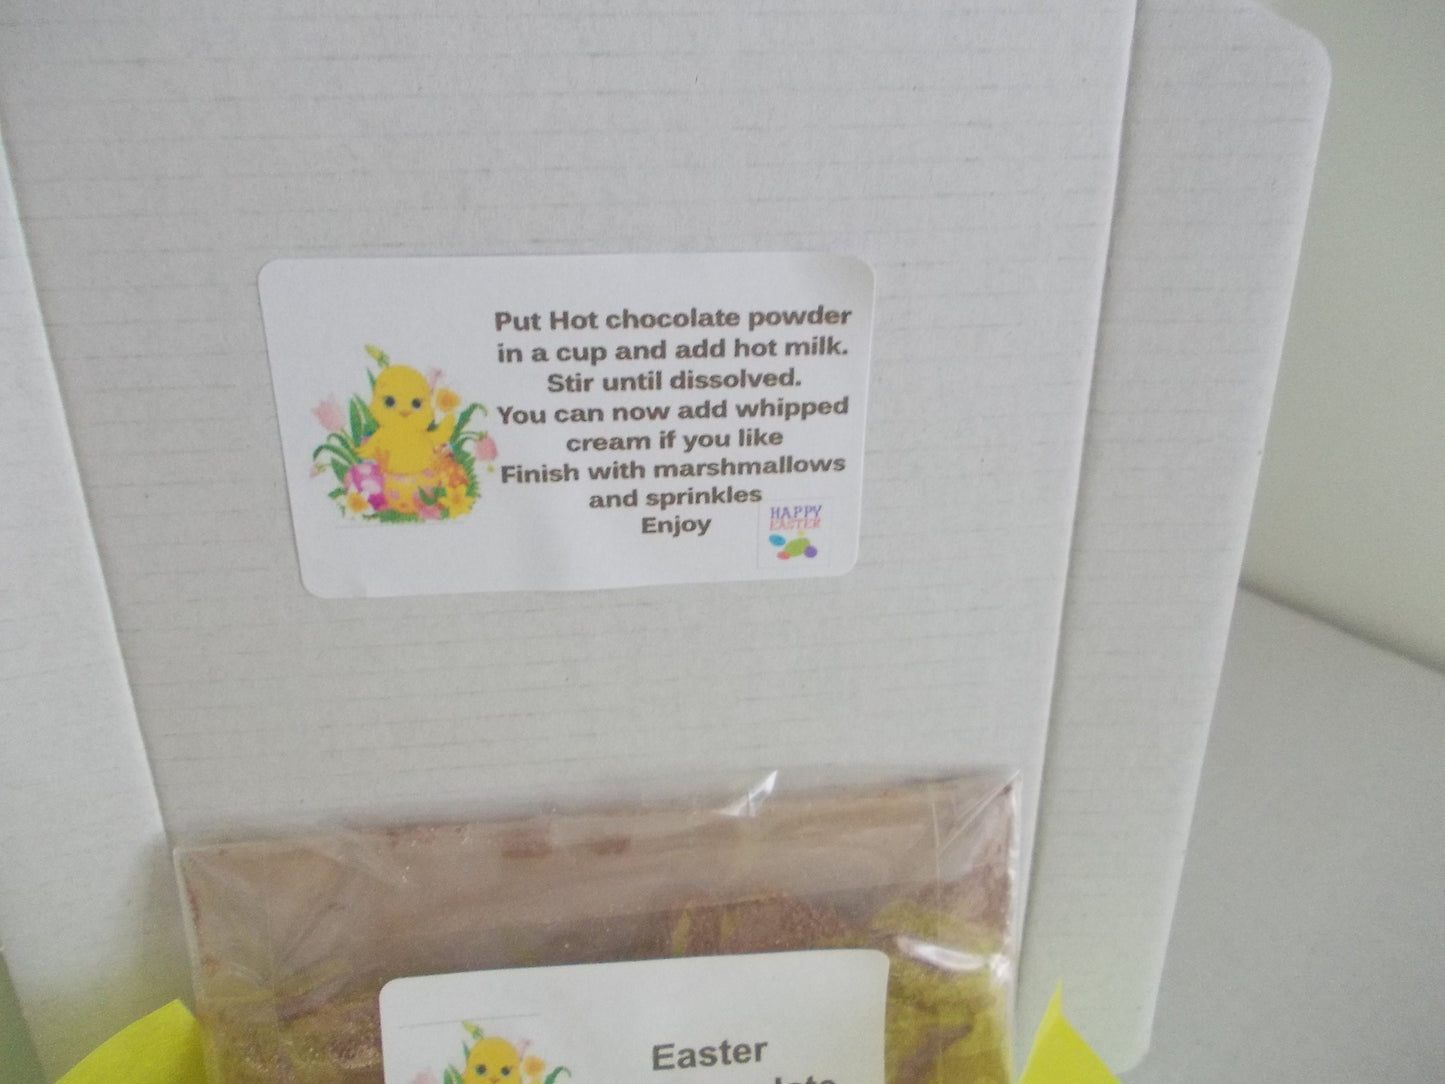 Easter Hot Chocolate letterbox giftbox, A hug in a mug for someone you love, grate Card alternative, Kids chocolate gift